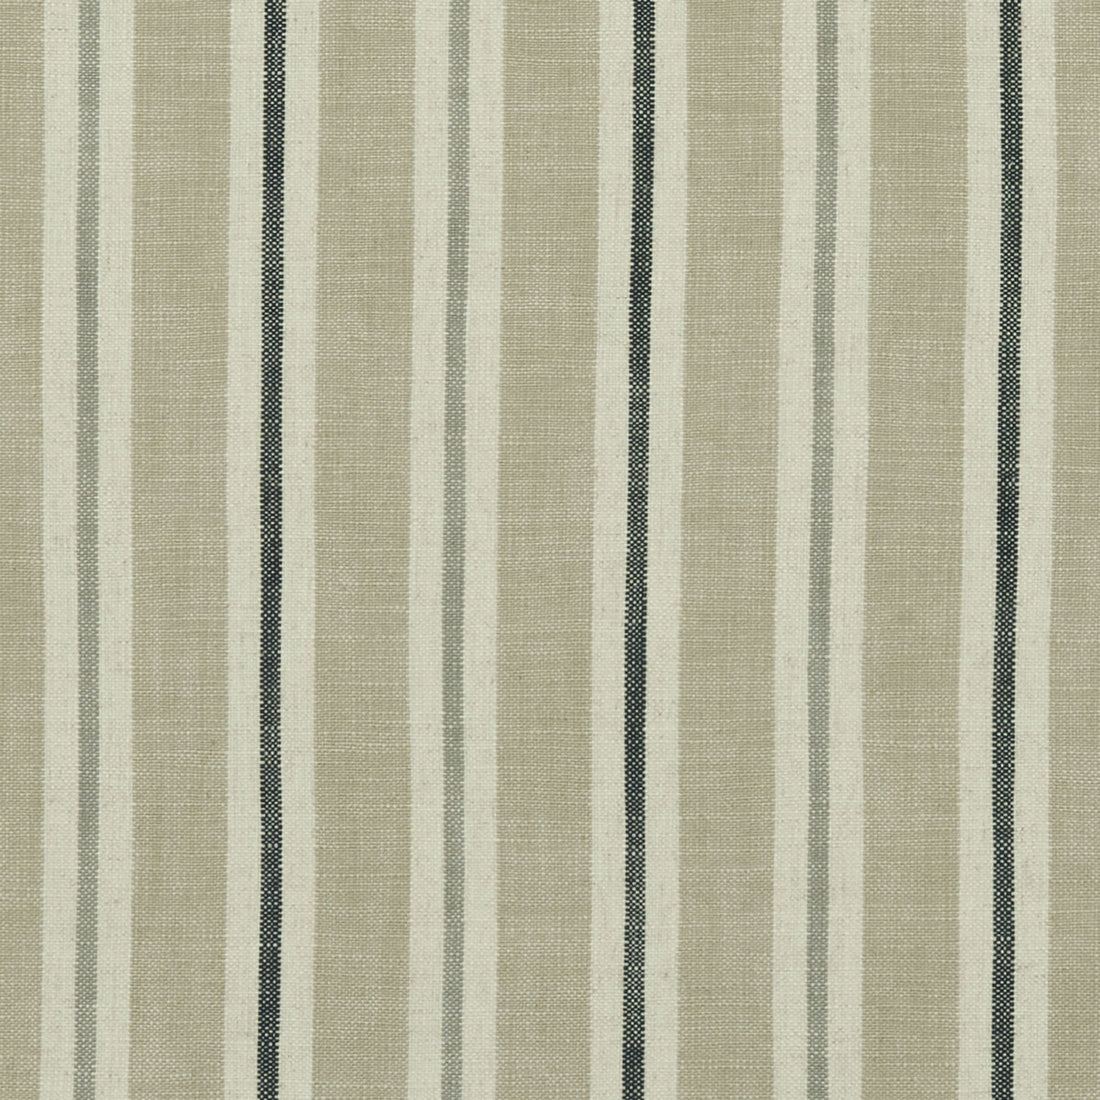 Sackville Stripe fabric in natural color - pattern F1046/06.CAC.0 - by Clarke And Clarke in the Clarke &amp; Clarke Castle Garden collection